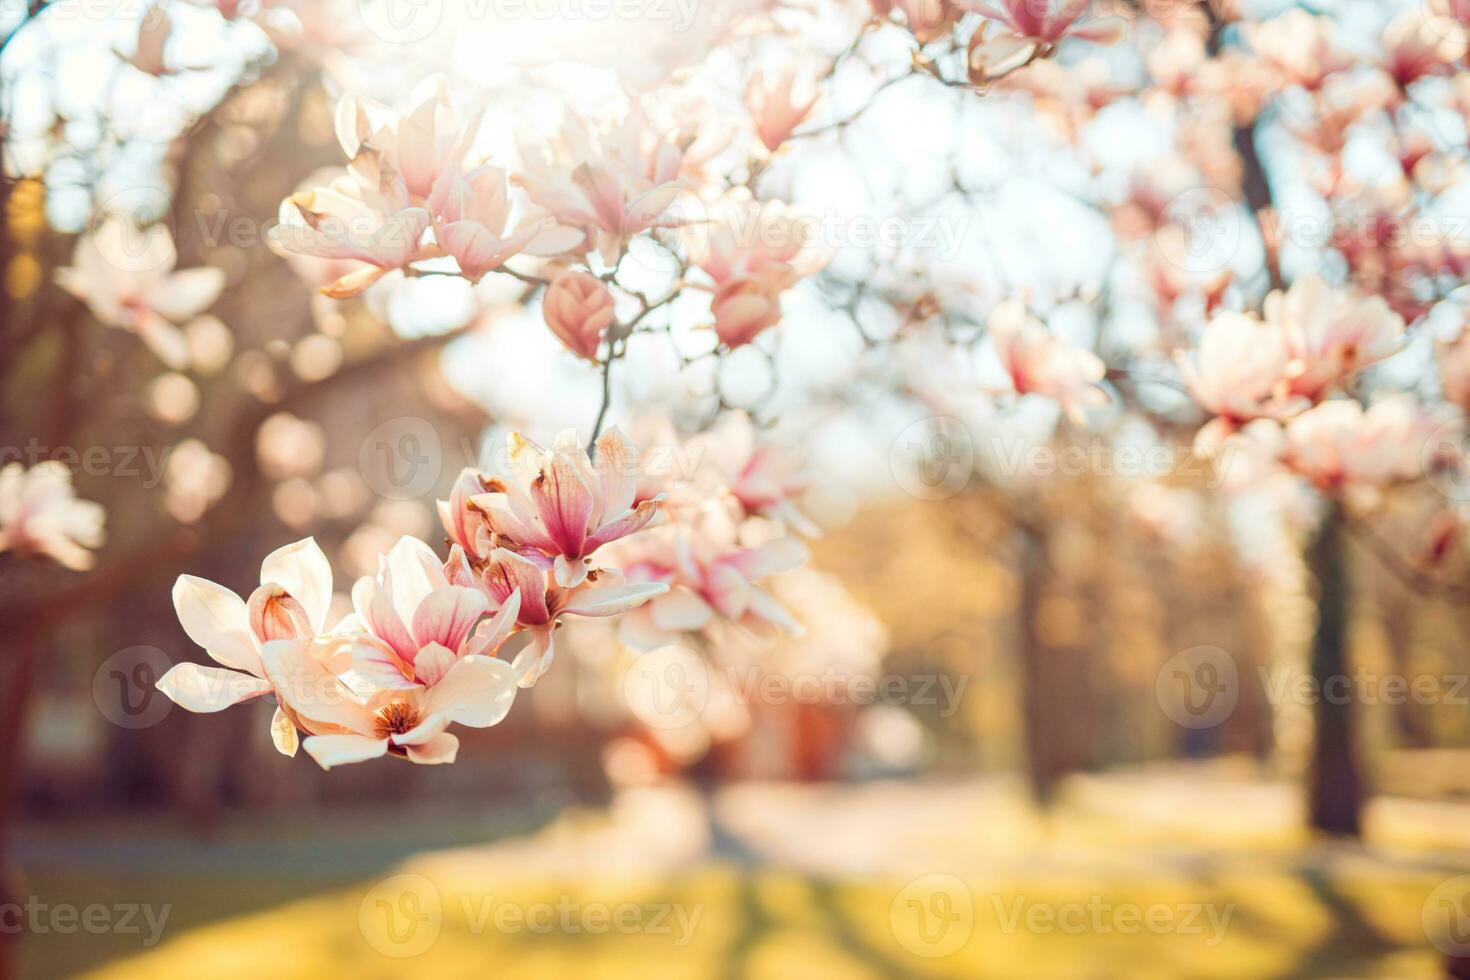 Perfect romantic pastel colored nature background for spring or summer background. Pink magnolia flowers and soft blue sky as relaxing moody closeup photo